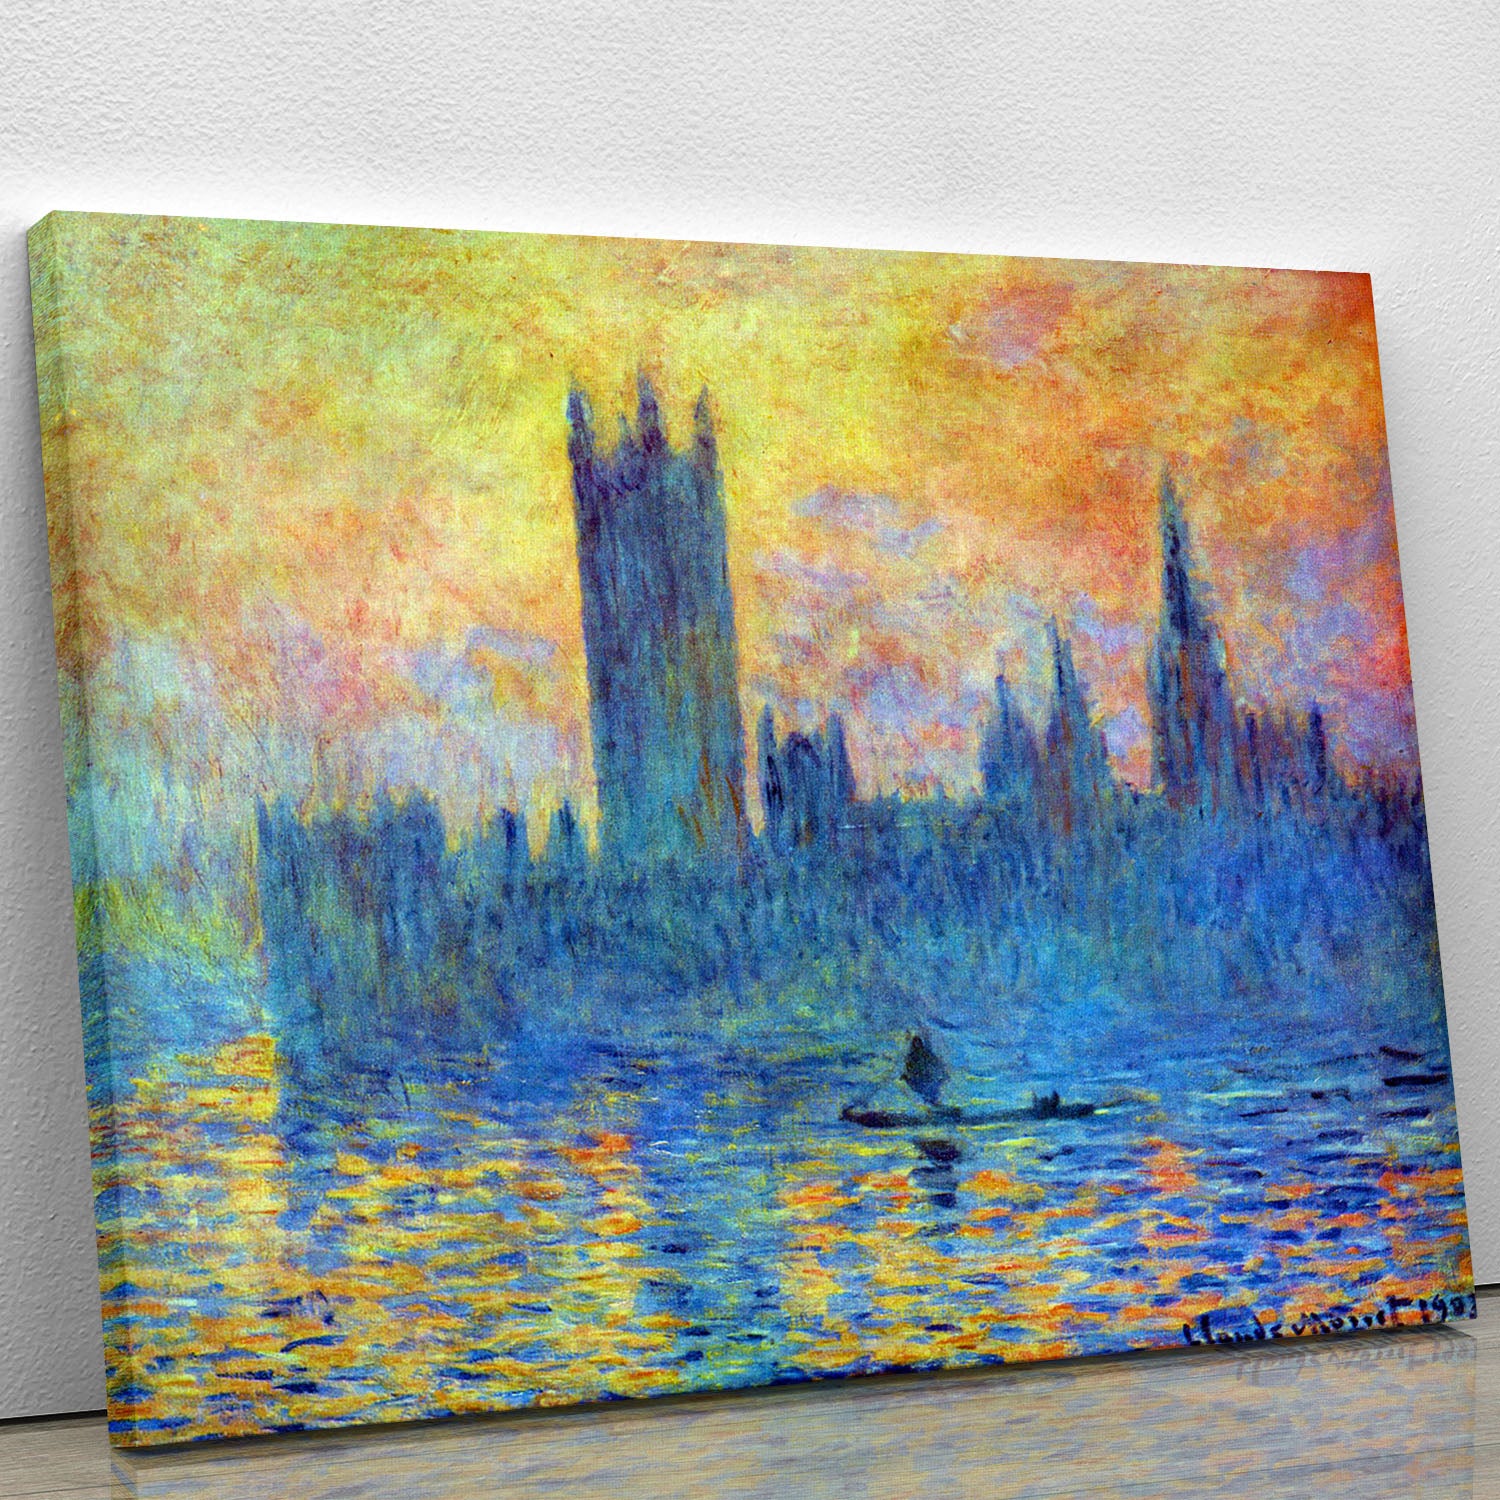 London Parliament in Winter by Monet Canvas Print or Poster - Canvas Art Rocks - 1